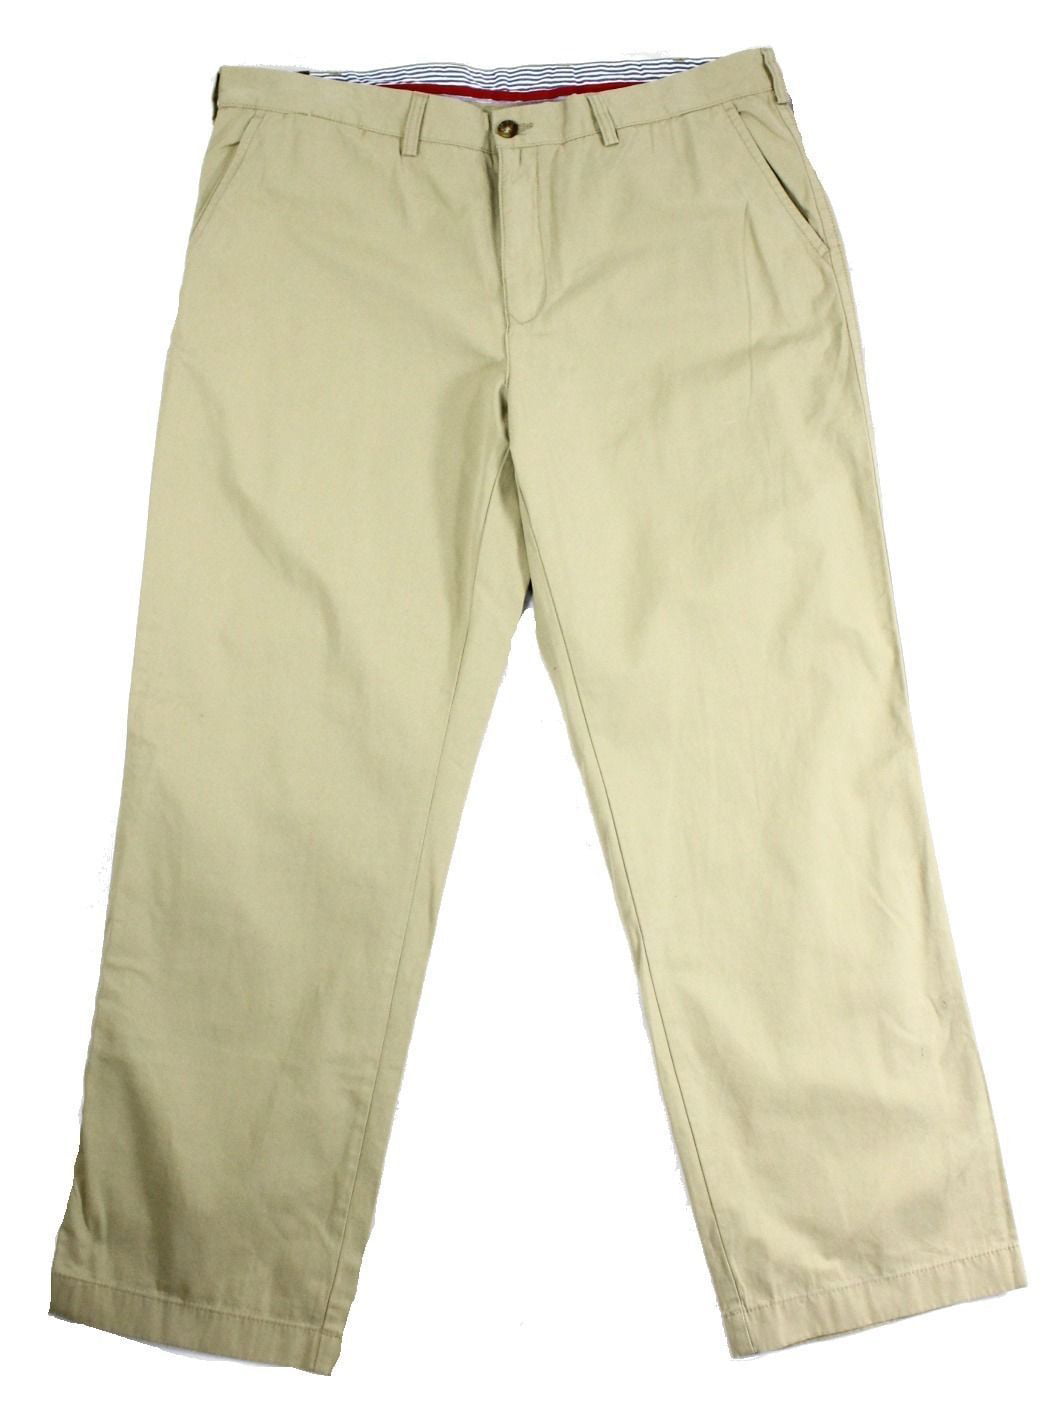 Tommy Hilfiger NEW Beige Mens Size 34X34 Classic Fit Khakis Chinos ...